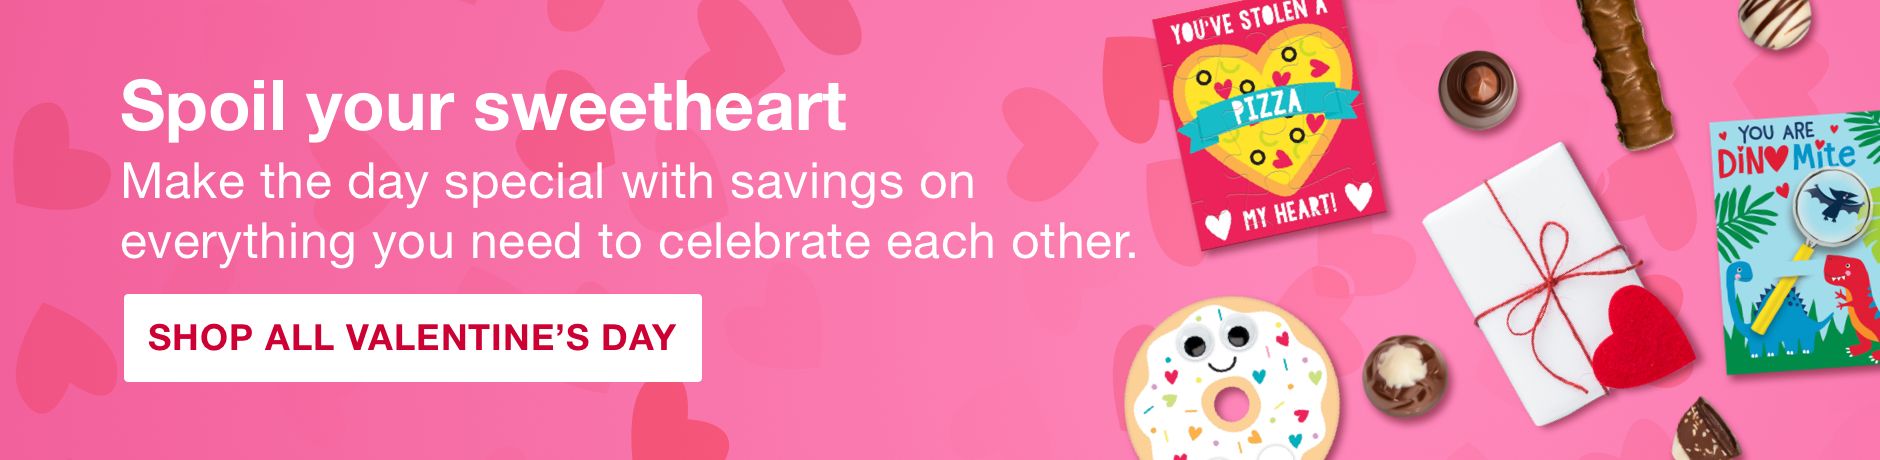 Spoil your sweetheart. Make the day special with savings on everything you need to celebrate each other. Click here to shop all Valentine